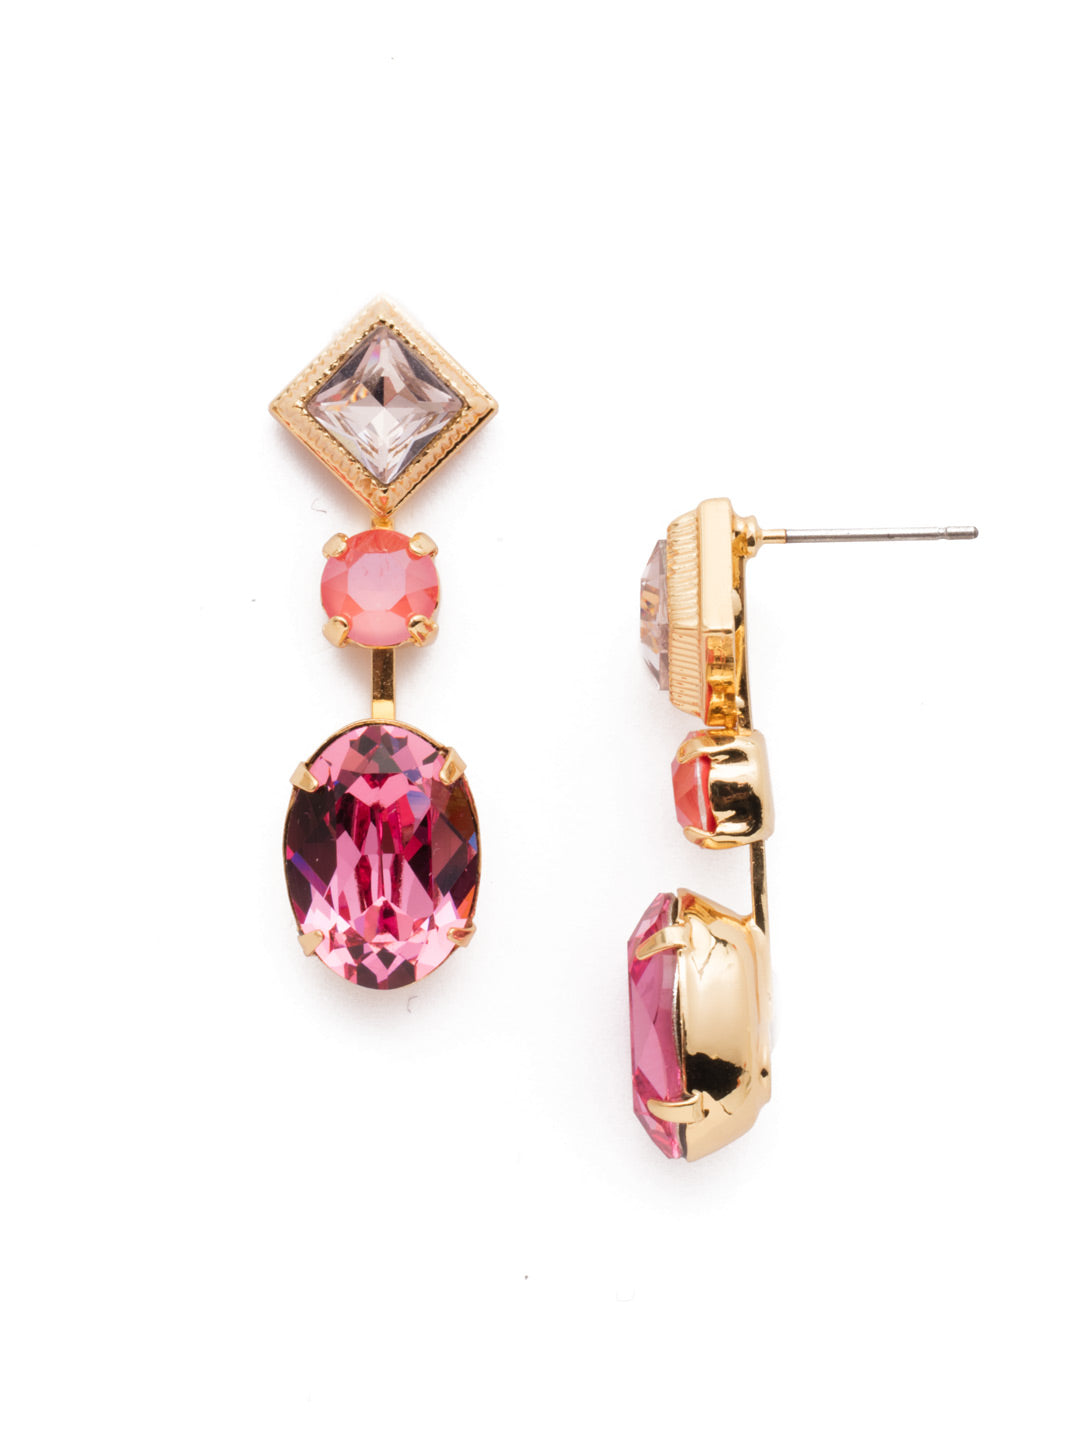 Delilah Dangle Earrings - EEK29BGBGA - The Delilah Dangle Earrings are perfect when you want to drip in sparkle. Be it an oval- or diamond-shaped stone, this pretty pair has it all. From Sorrelli's Begonia collection in our Bright Gold-tone finish.